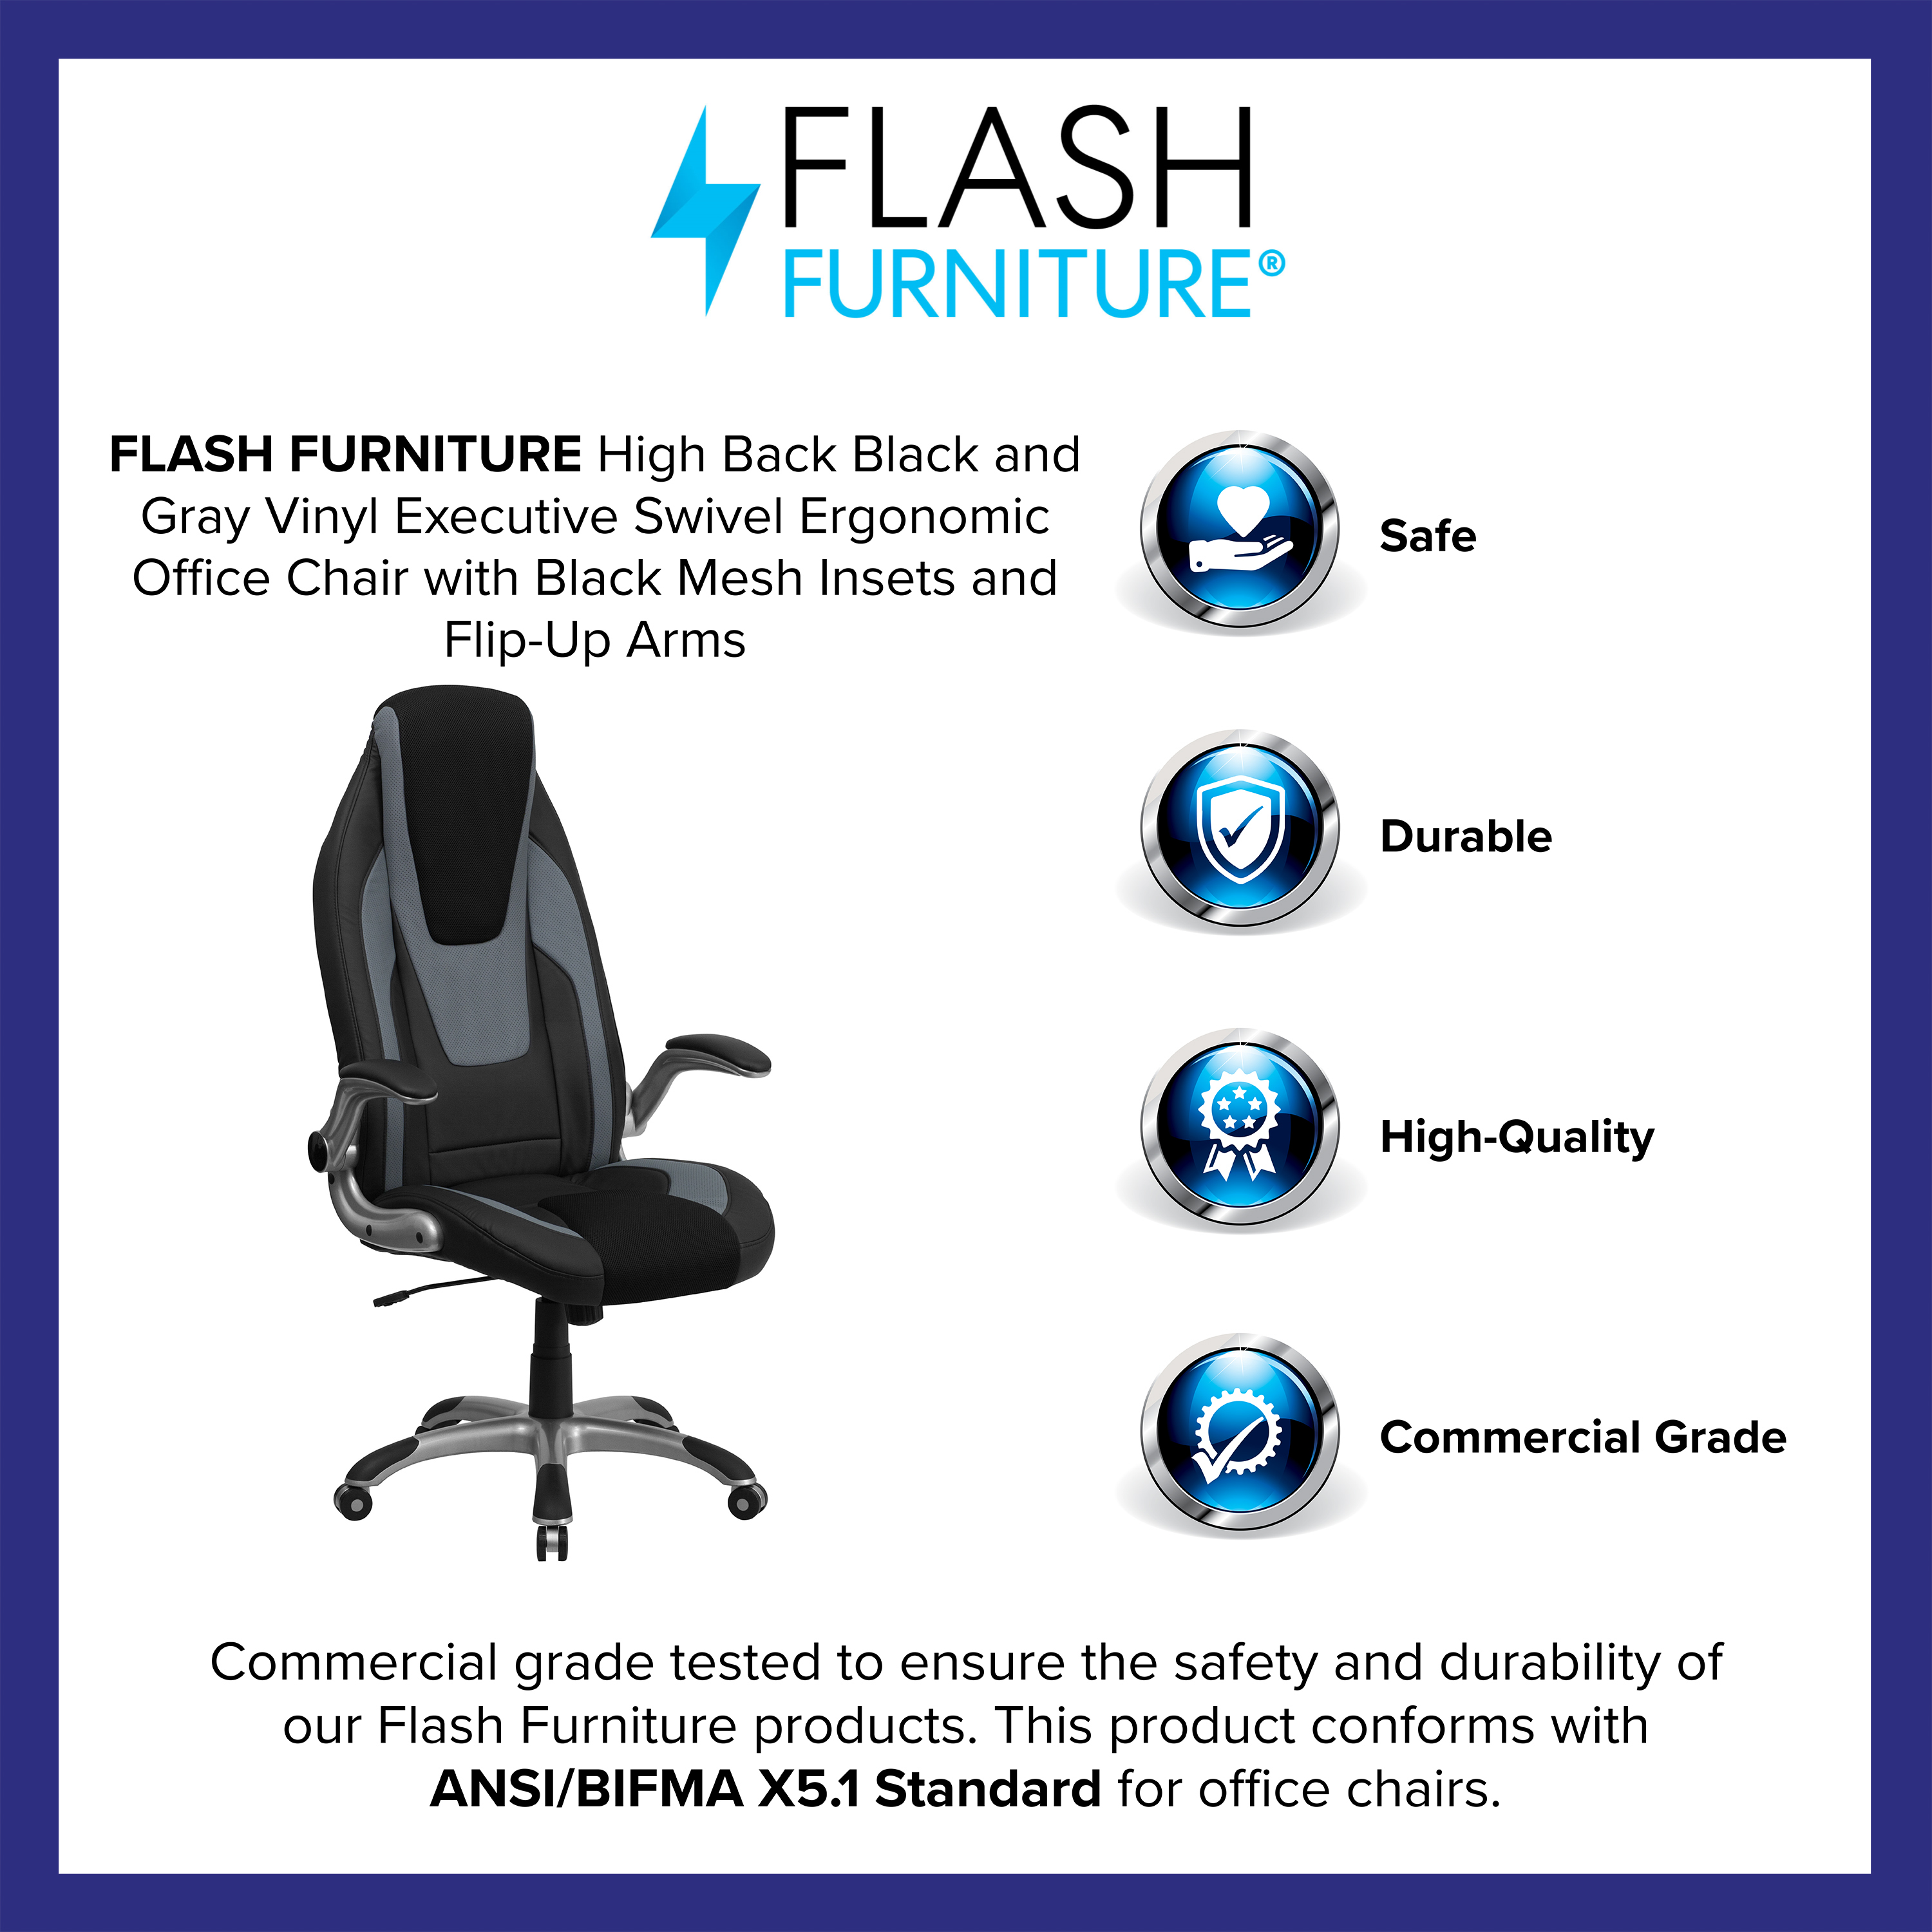 Flash Furniture High Back Black and Gray Vinyl Executive Swivel Ergonomic Office Chair with Black Mesh Insets and Flip-Up Arms - image 3 of 6